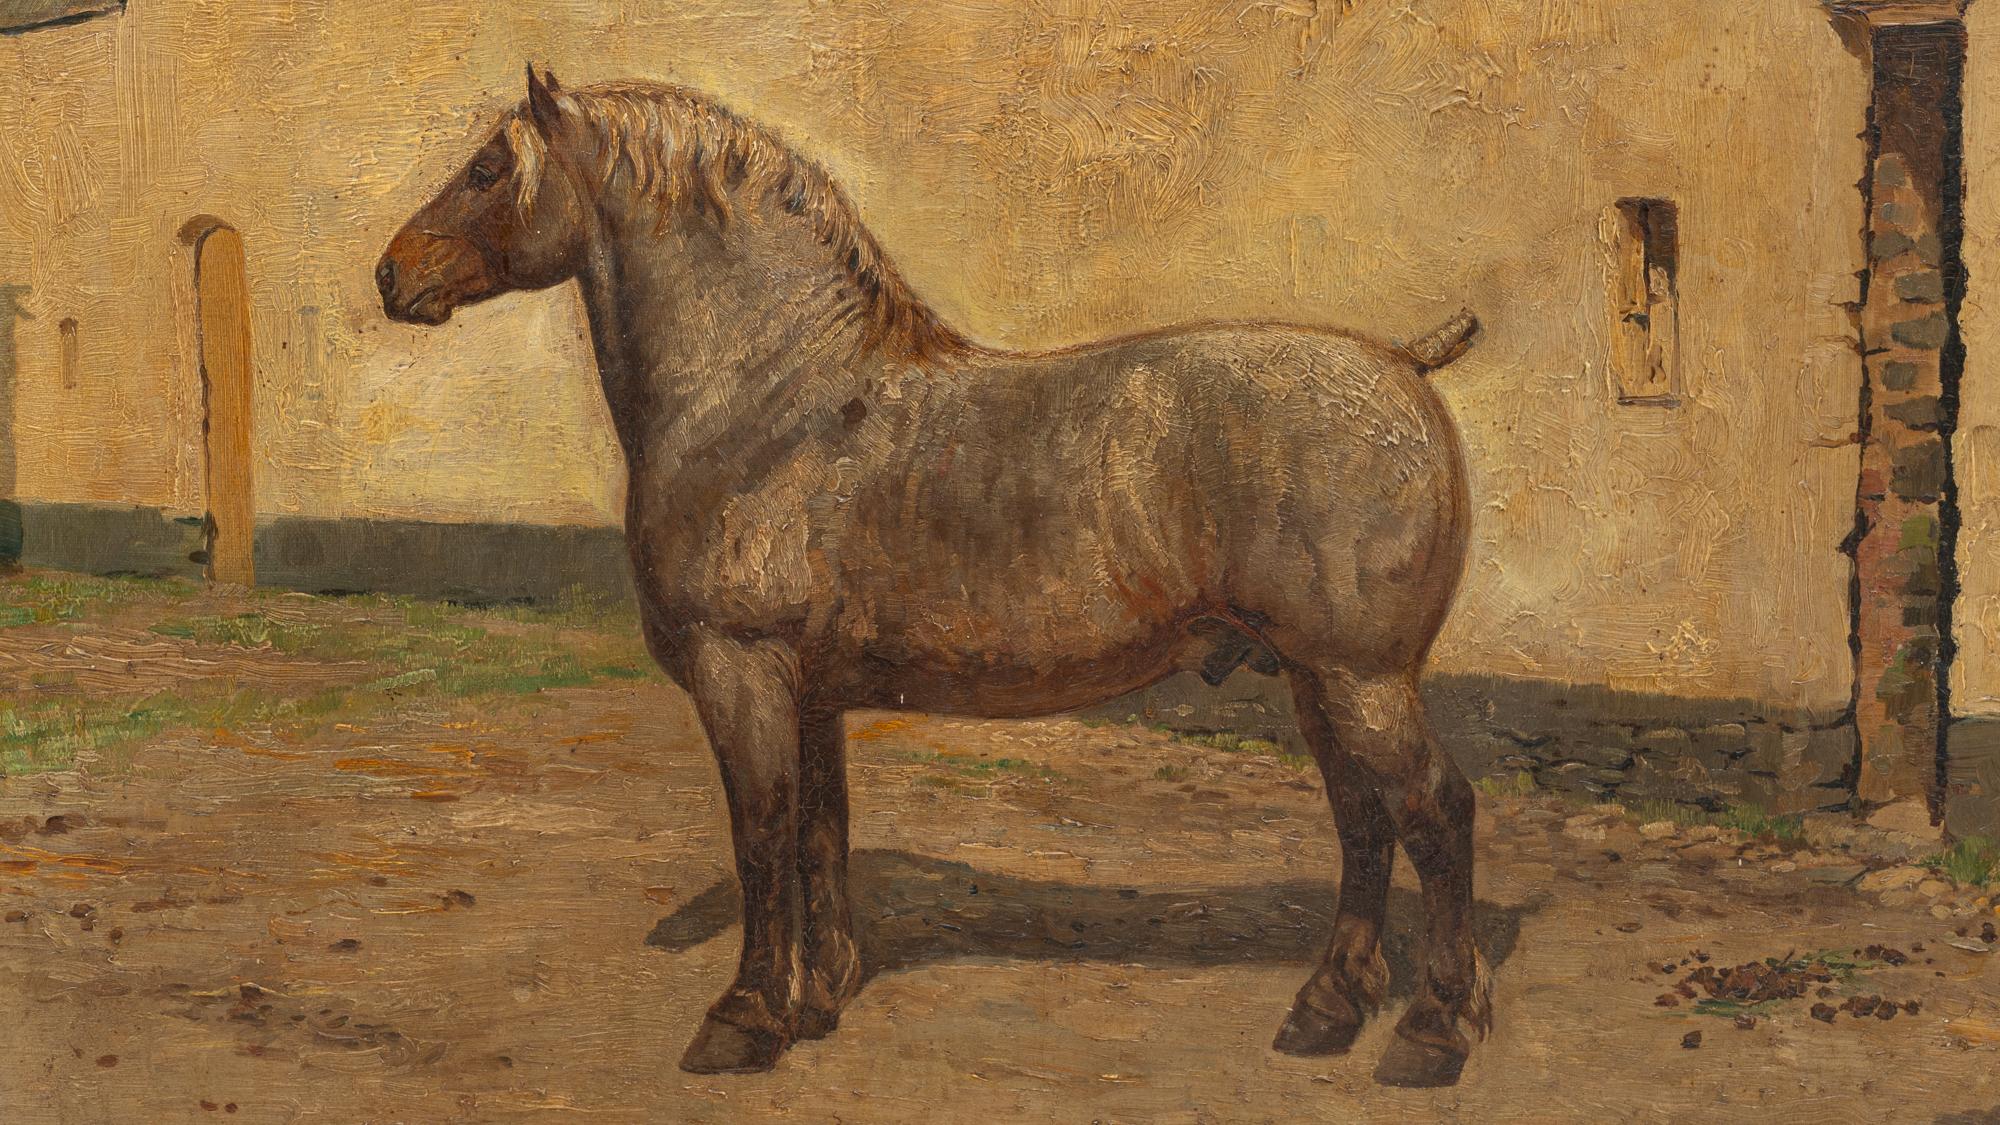 Behold a glimpse of pastoral tranquility with this 19th Century Belgian Painting, depicting a sturdy draft horse standing resolutely before an old stable. The horse's dappled coat, rendered in hues of grey and taupe, reflects the mastery of the